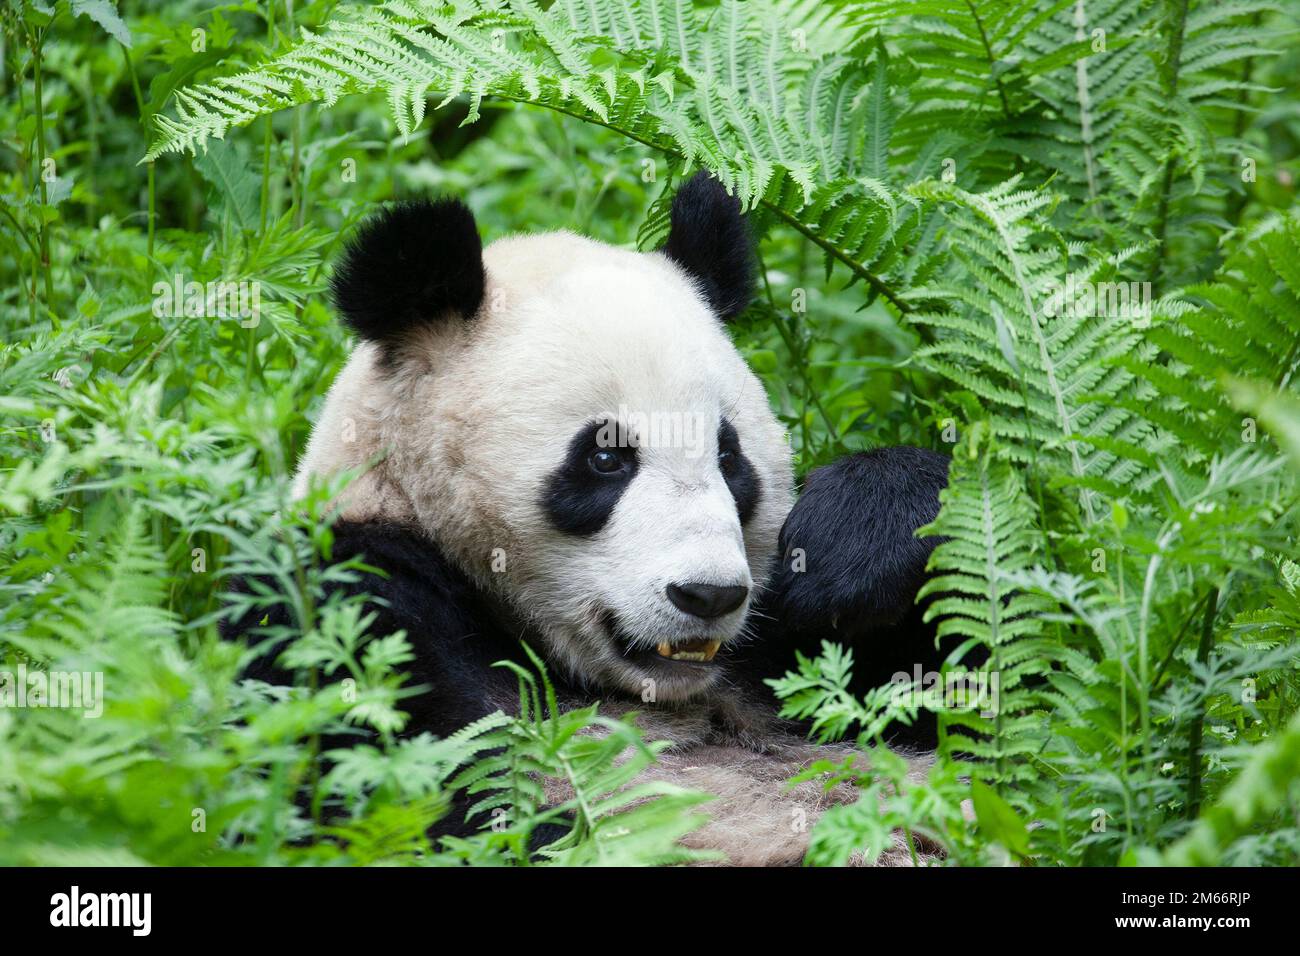 Giant Panda in green forest understory ferns, Wolong National Nature Reserve, Sichuan Province, China. Ailuropoda melanoleuca Stock Photo